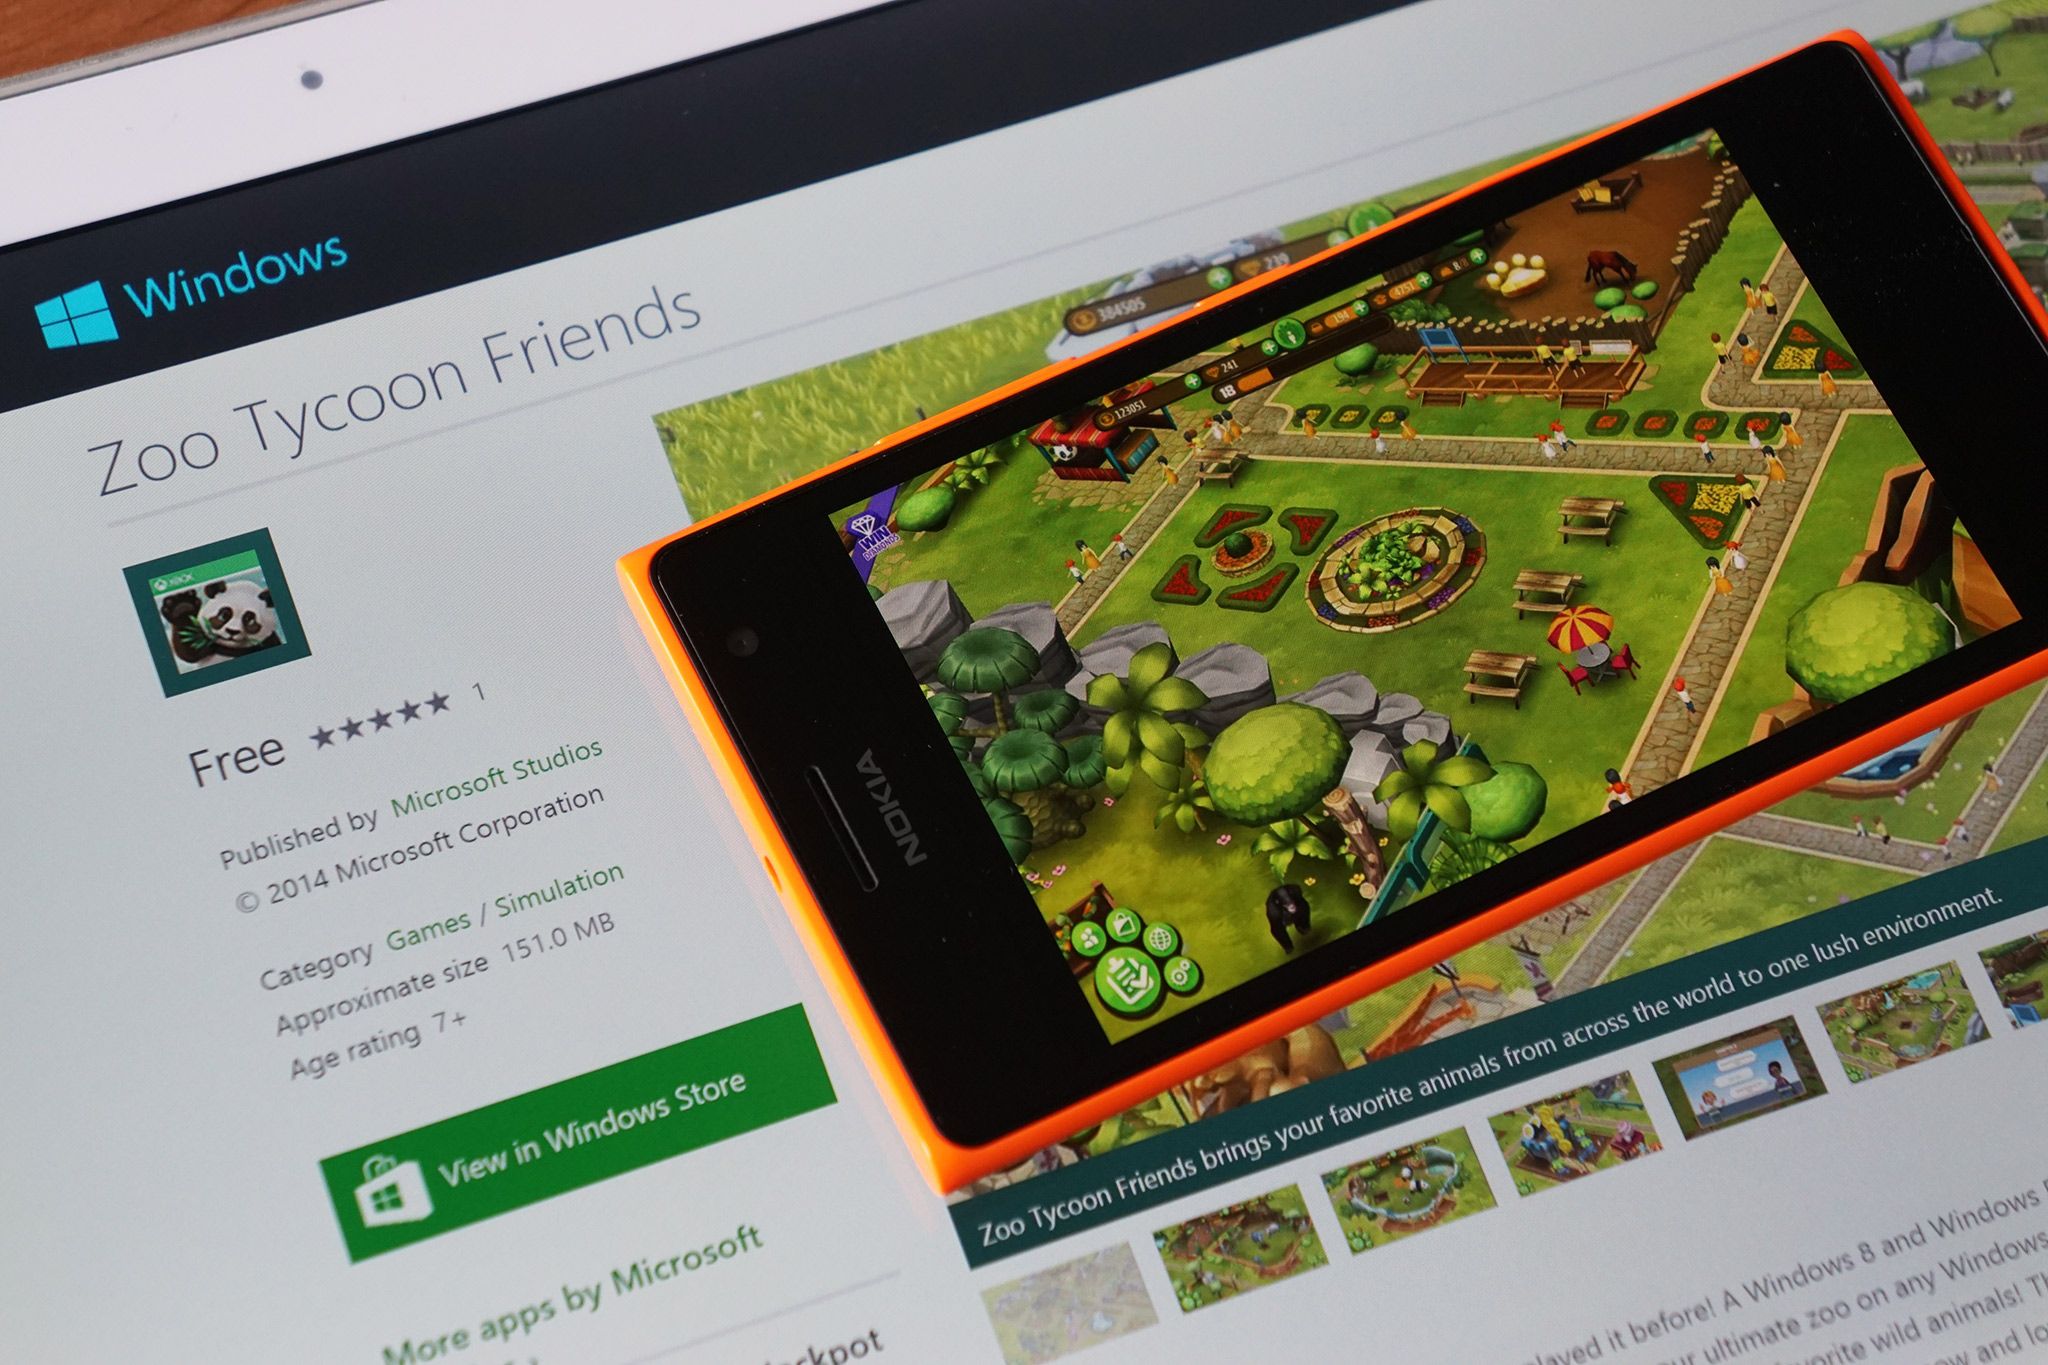 Xbox Live's Zoo Tycoon Friends launches for Windows Phone and